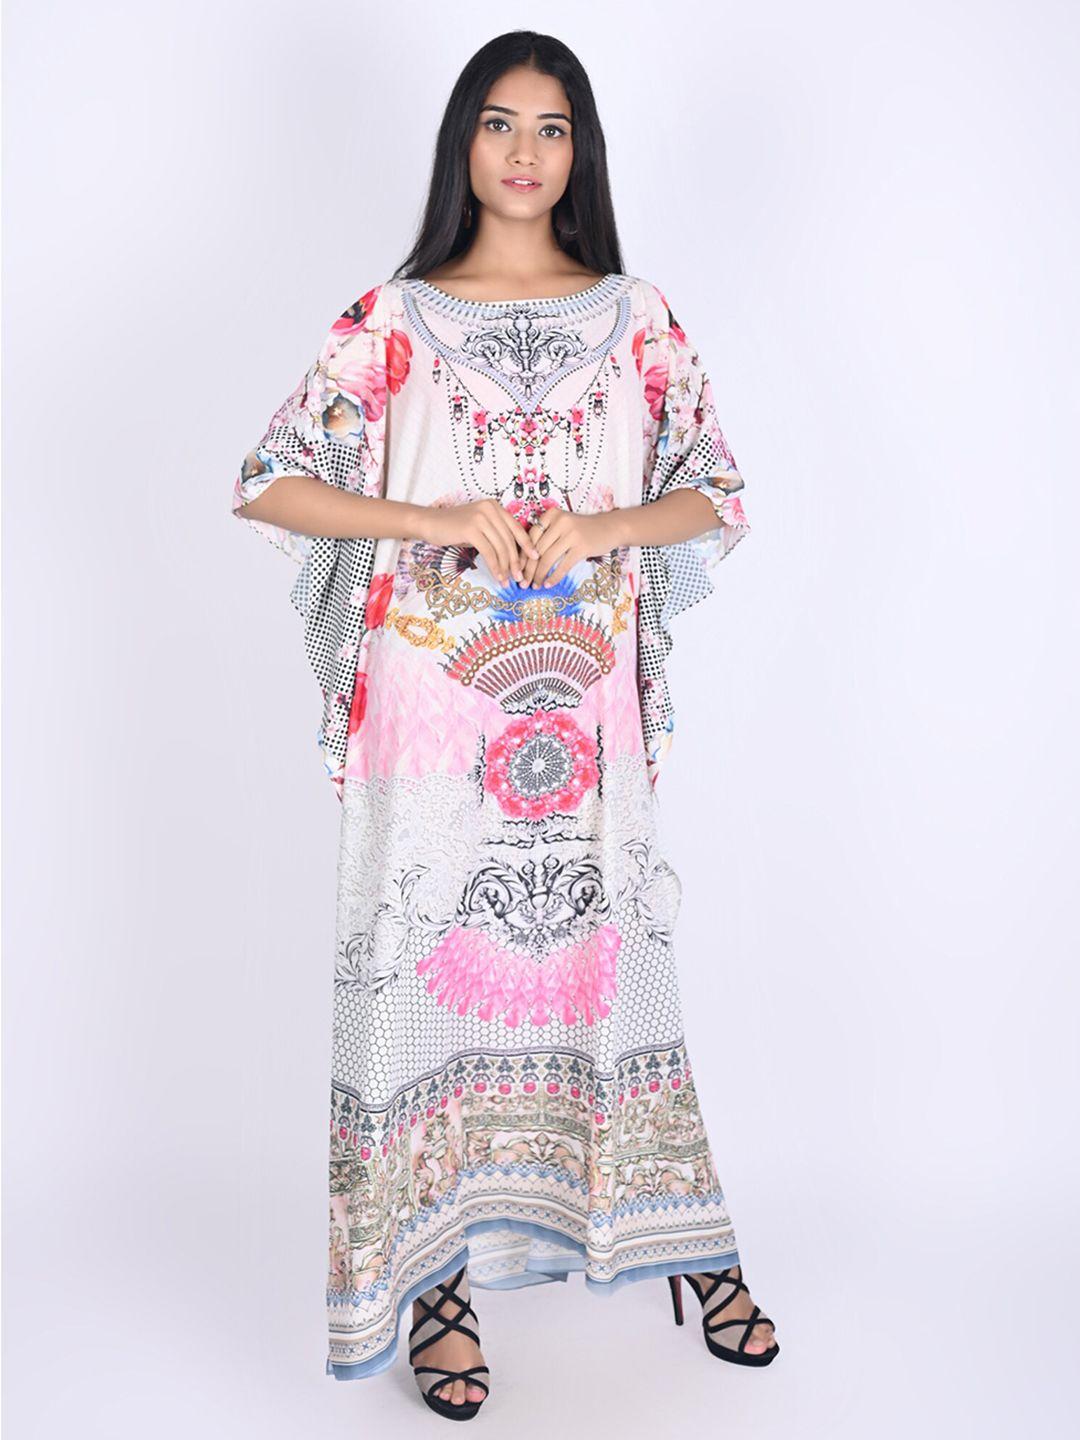 rajoria-instyle-white-&-pink-ethnic-motifs-printed-georgette-maxi-dress